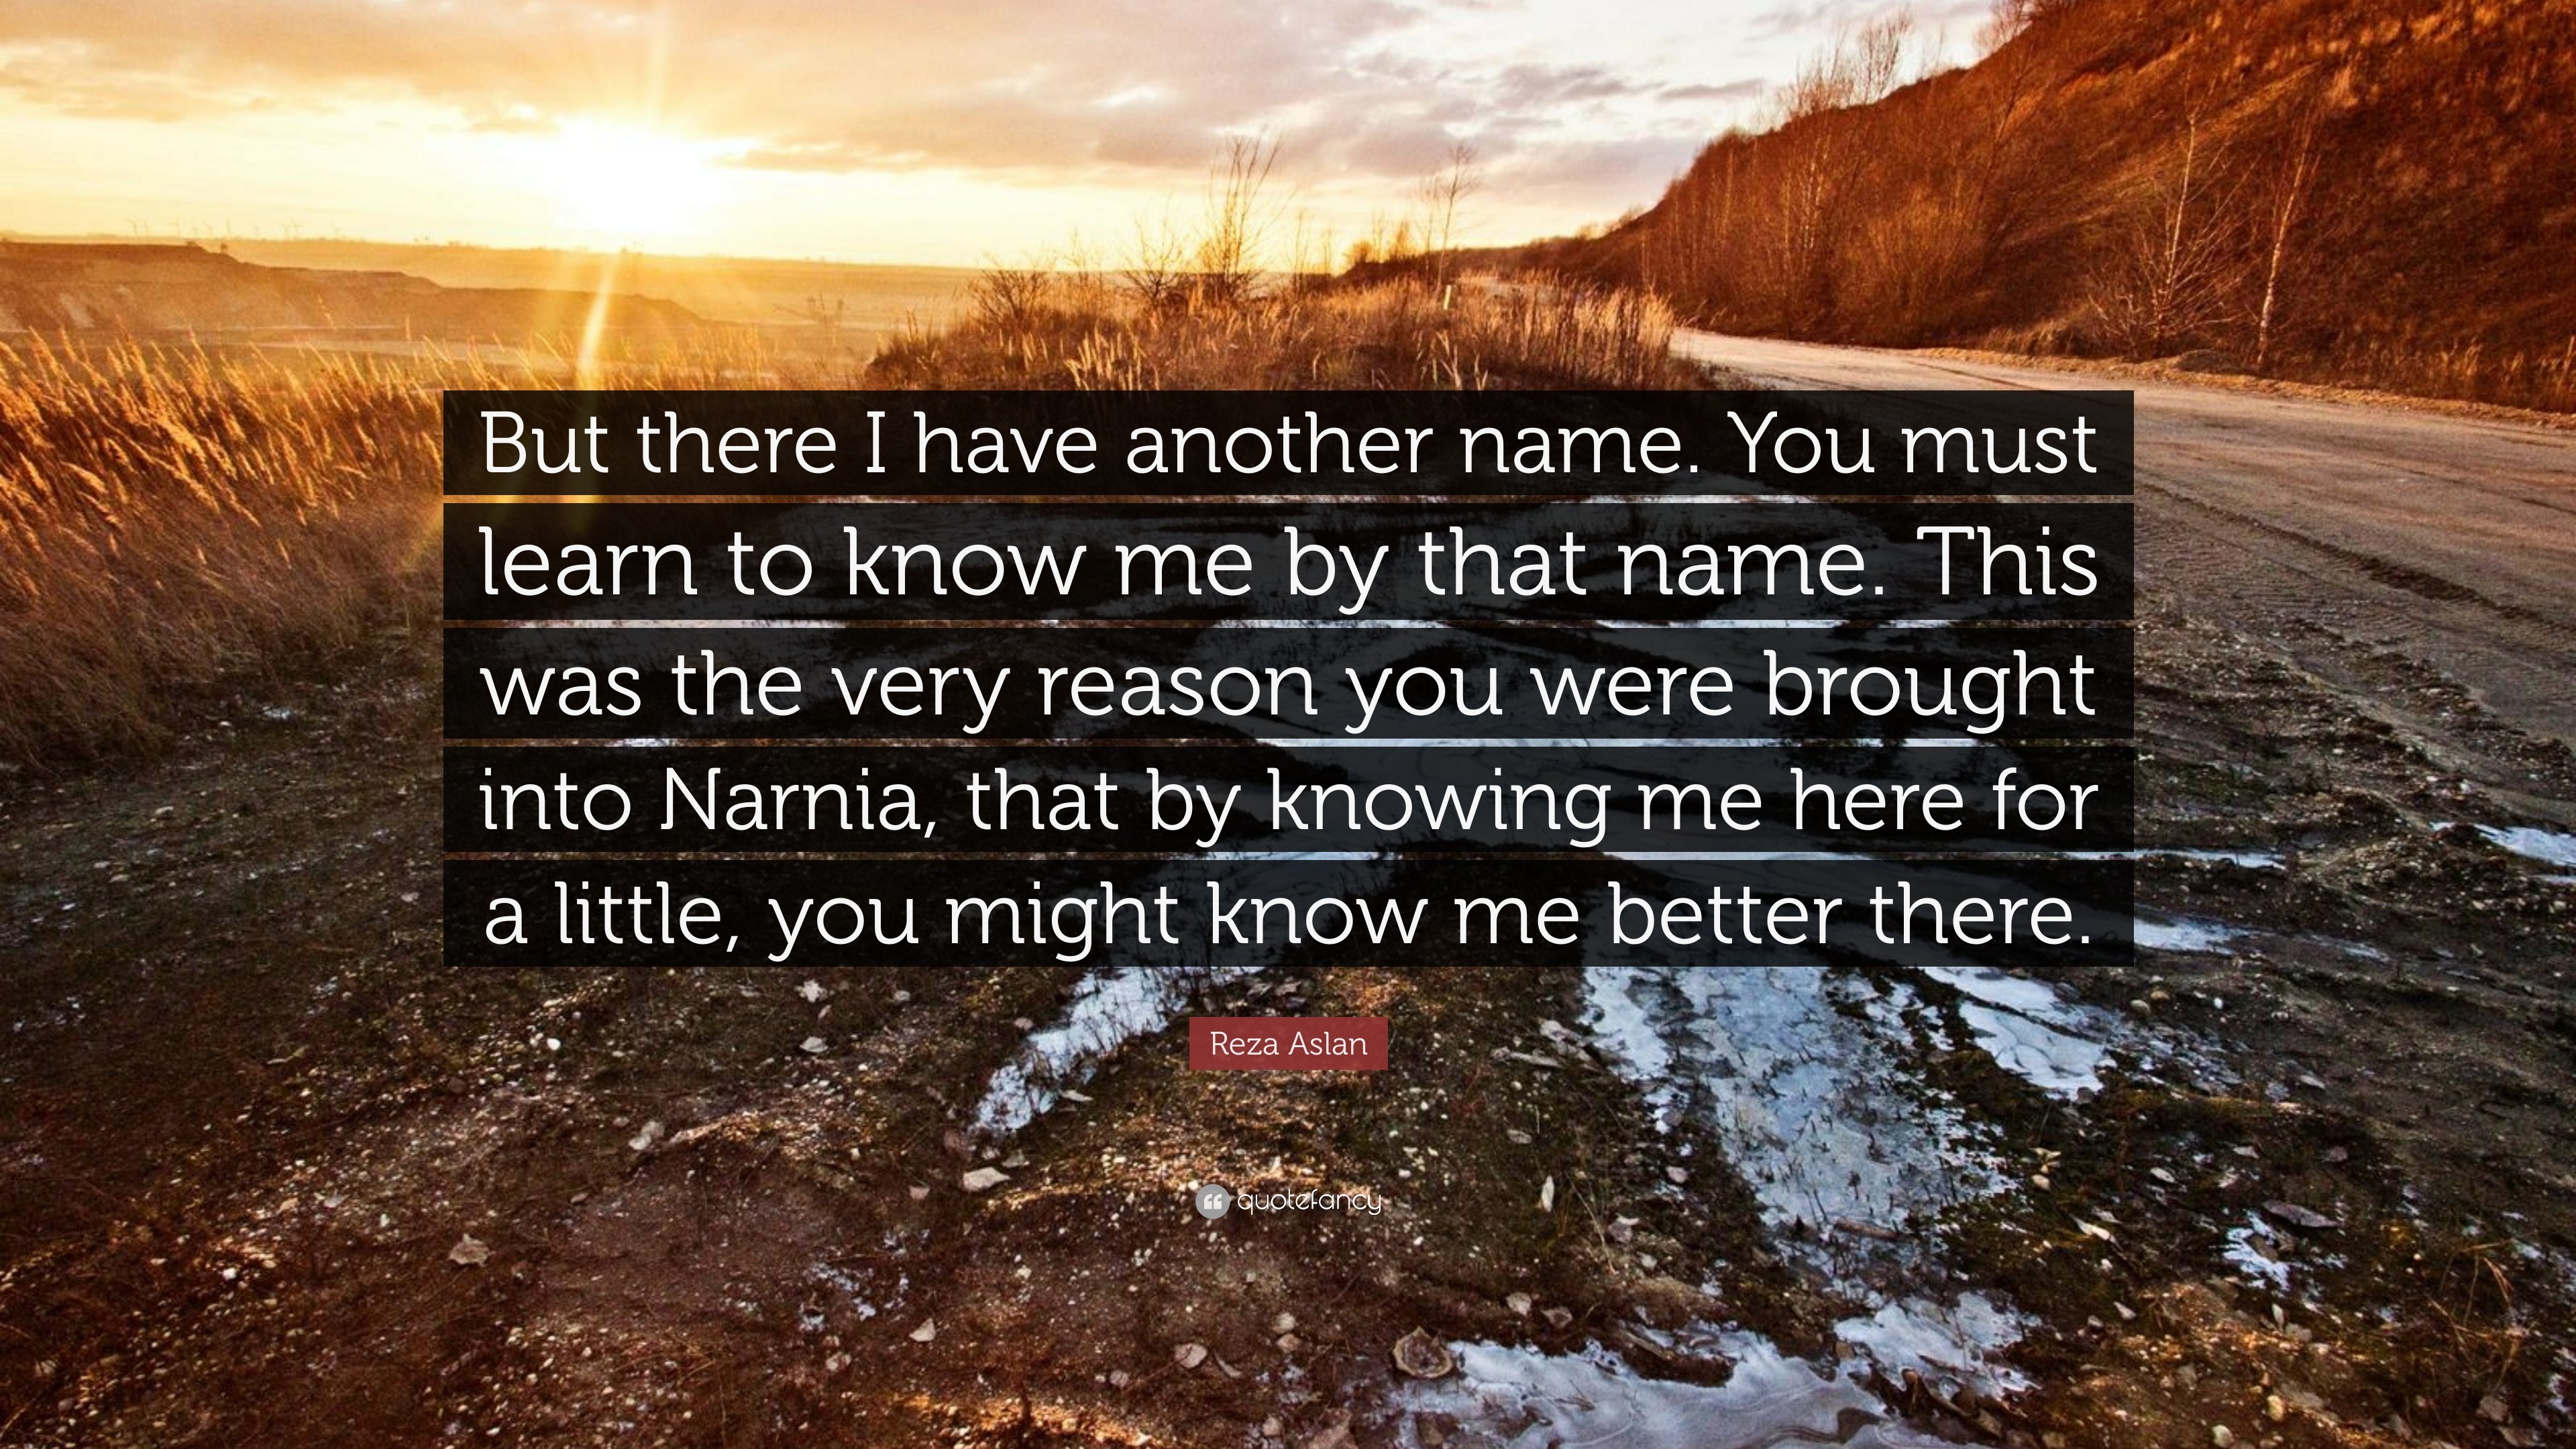 3840x2160 Reza Aslan Quote: “But there I have another name. You must learn to